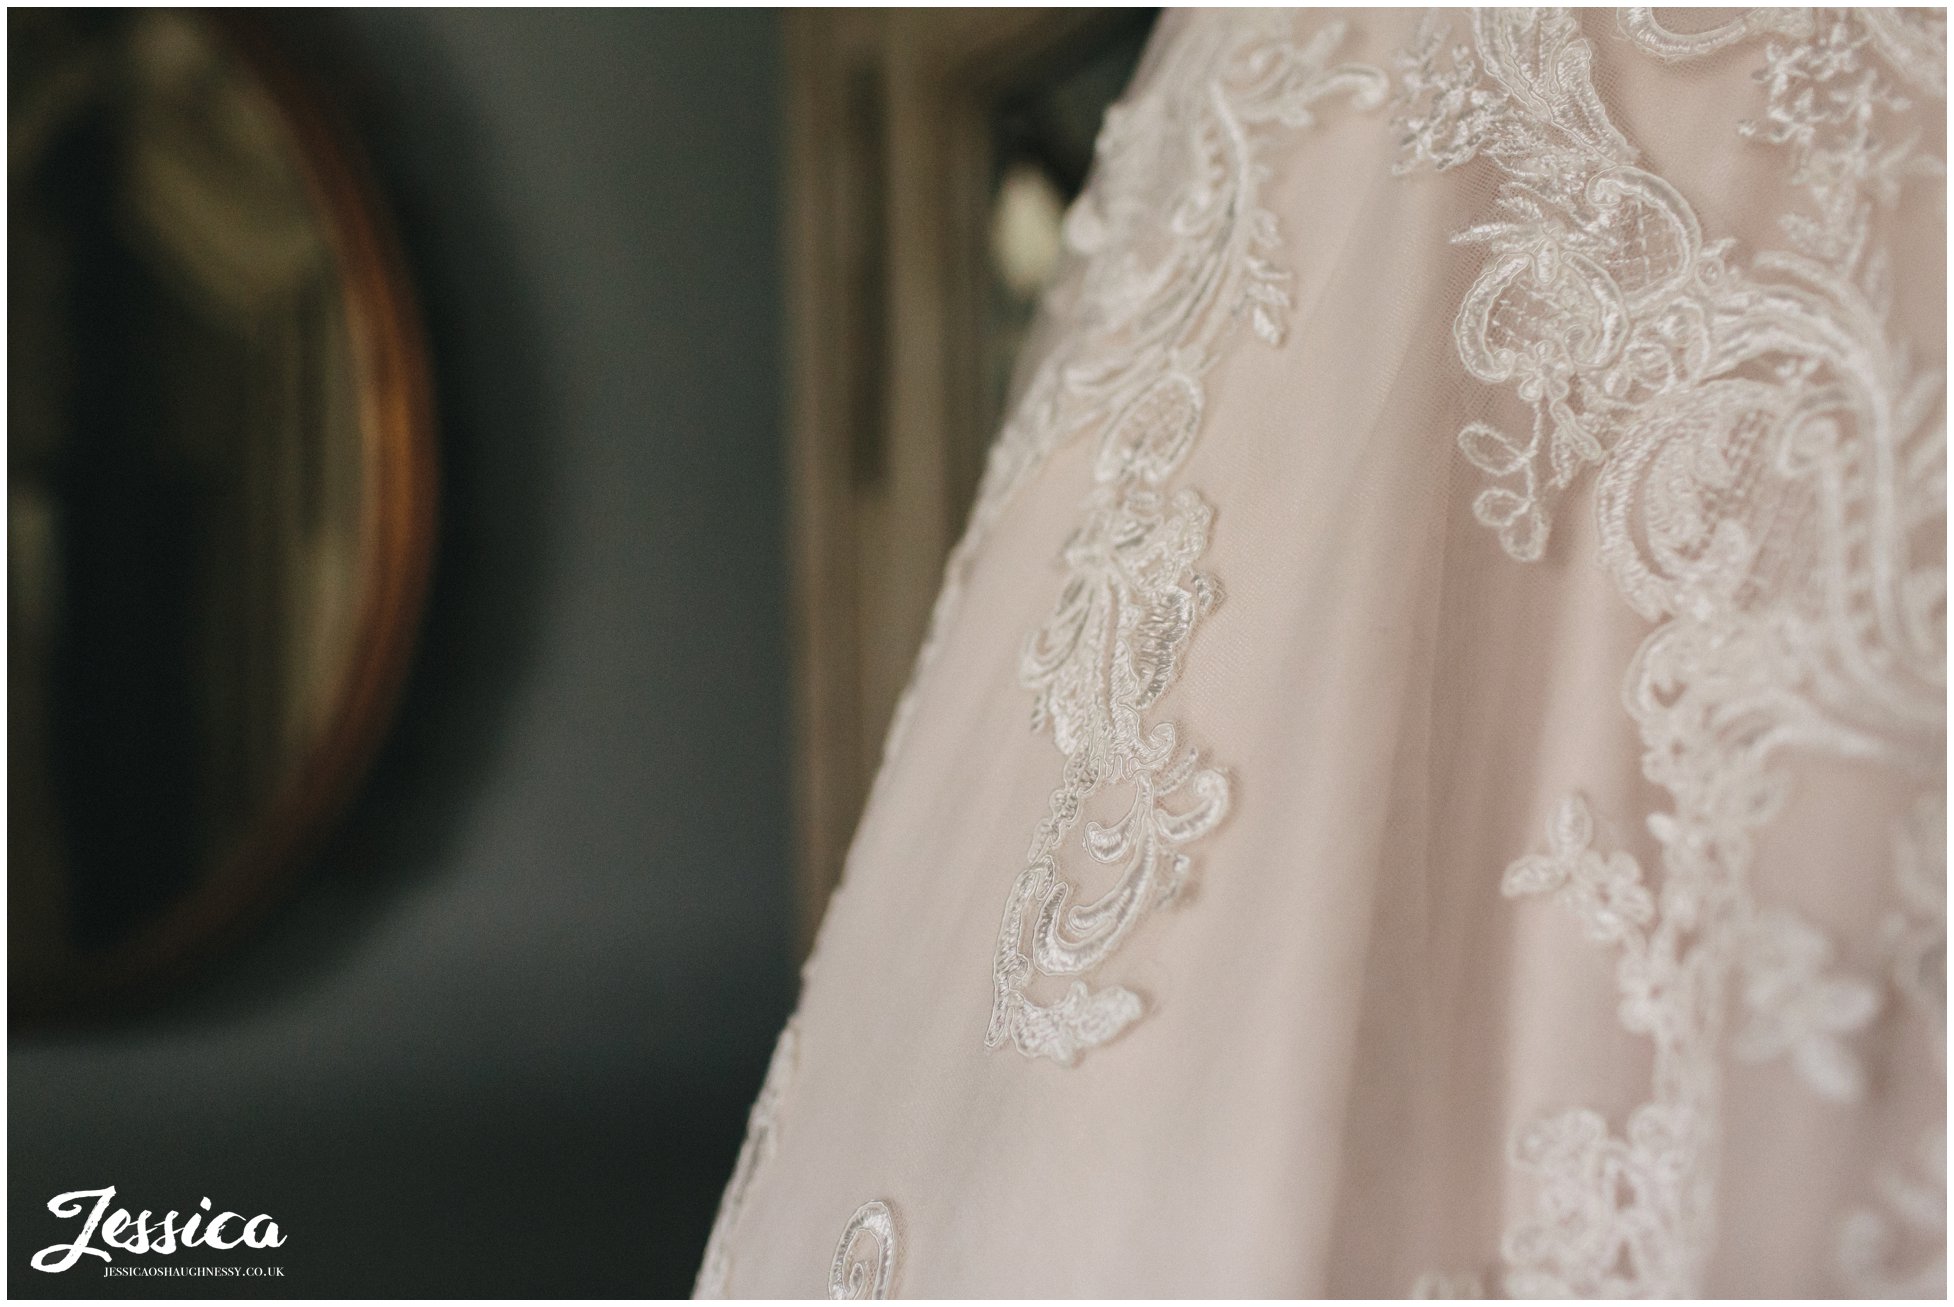 close up of lace detail on wedding dress